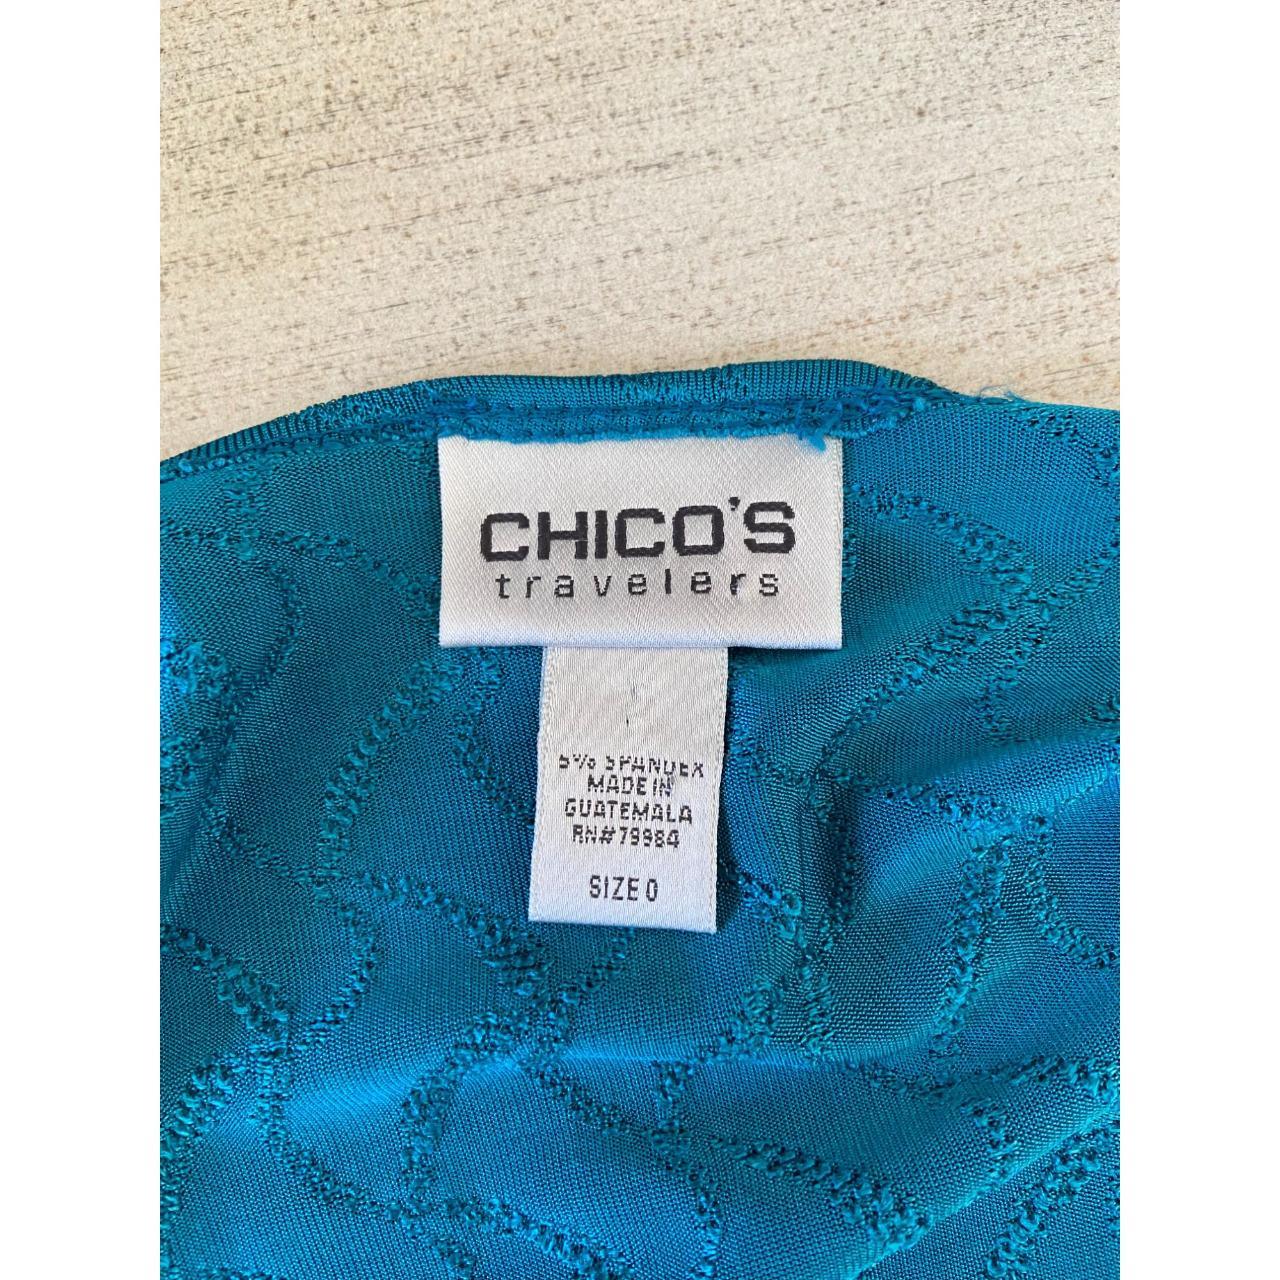 Chico's Travelers Turquoise wrap shirt (Size 0) - Depop